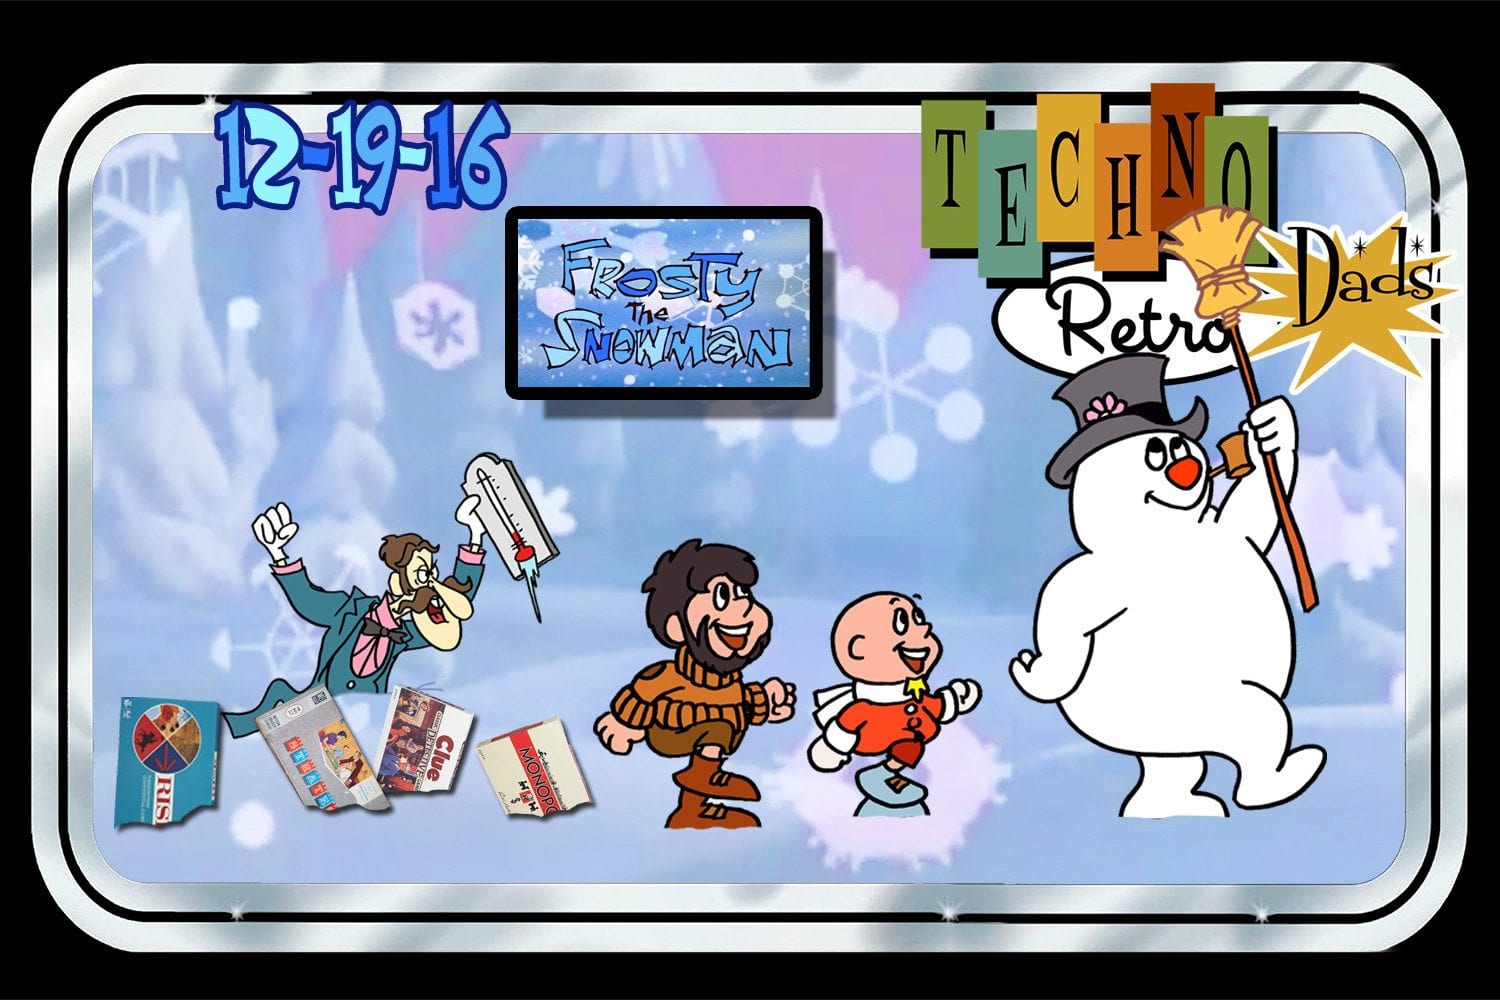 TechnoRetro Dads Frosty the Snowman